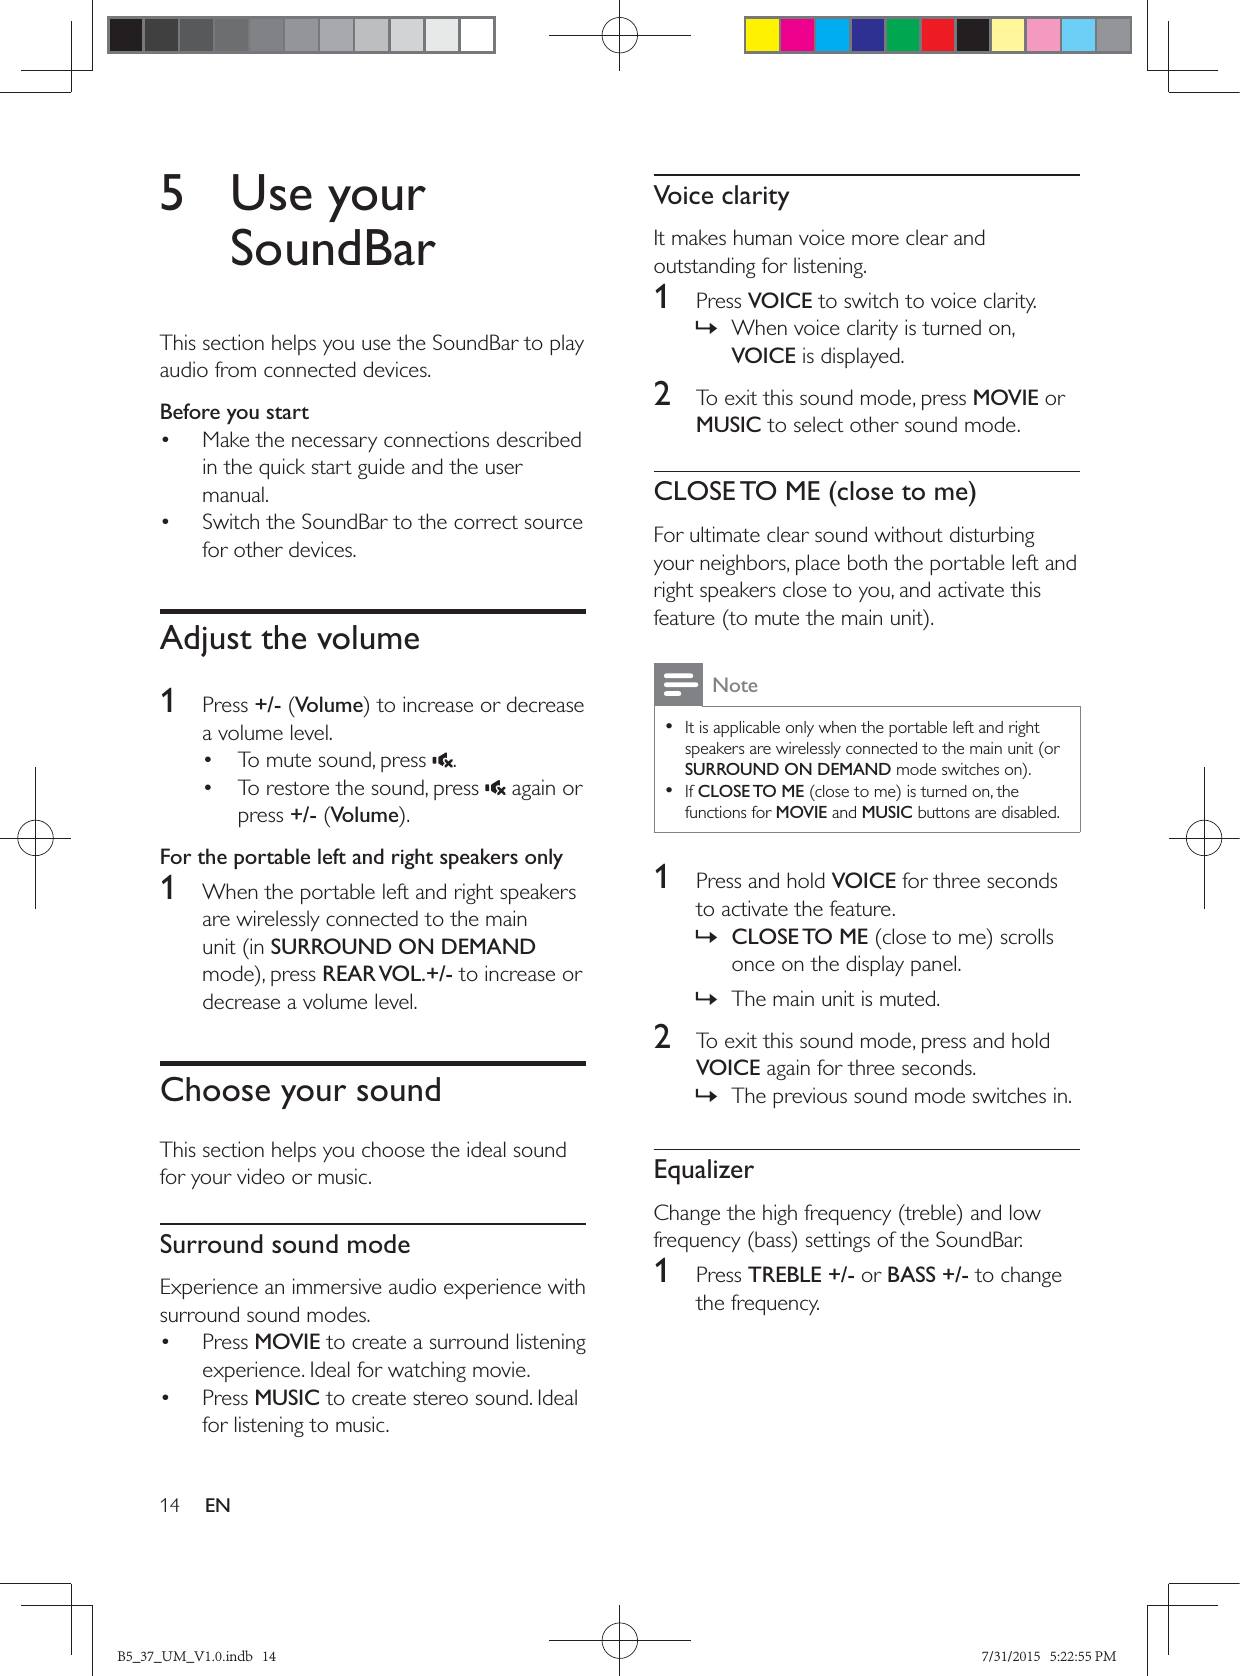 14 EN5 Use your SoundBarThis section helps you use the SoundBar to play audio from connected devices.Before you start•  Make the necessary connections described in the quick start guide and the user manual.•  Switch the SoundBar to the correct source for other devices.Adjust the volume1  Press +/- (Volumea volume level.•  To mute sound, press  .•  To restore the sound, press   again or press +/- (VolumeFor the portable left and right speakers only1  When the portable left and right speakers are wirelessly connected to the main unit (in SURROUND ON DEMAND REAR VOL.+/- to increase or decrease a volume level. Choose your soundThis section helps you choose the ideal sound for your video or music.Surround sound modeExperience an immersive audio experience with surround sound modes.• Press MOVIE to create a surround listening experience. Ideal for watching movie.• Press MUSIC to create stereo sound. Ideal for listening to music. Voice clarityIt makes human voice more clear and outstanding for listening.1  Press VOICE to switch to voice clarity. » When voice clarity is turned on, VOICE is displayed.2  To exit this sound mode, press MOVIE or MUSIC to select other sound mode.CLOSE TO ME (close to me)For ultimate clear sound without disturbing your neighbors, place both the portable left and right speakers close to you, and activate this Note • It is applicable only when the portable left and right speakers are wirelessly connected to the main unit (or SURROUND ON DEMAND • If CLOSE TO MEfunctions for MOVIE and MUSIC buttons are disabled.1  Press and hold VOICE for three seconds to activate the feature. » CLOSE TO  MEonce on the display panel. » The main unit is muted.2  To exit this sound mode, press and hold VOICE again for three seconds.  » The previous sound mode switches in.Equalizer1  Press TREBLE +/- or BASS +/- to change the frequency.B5_37_UM_V1.0.indb   14 7/31/2015   5:22:55 PM